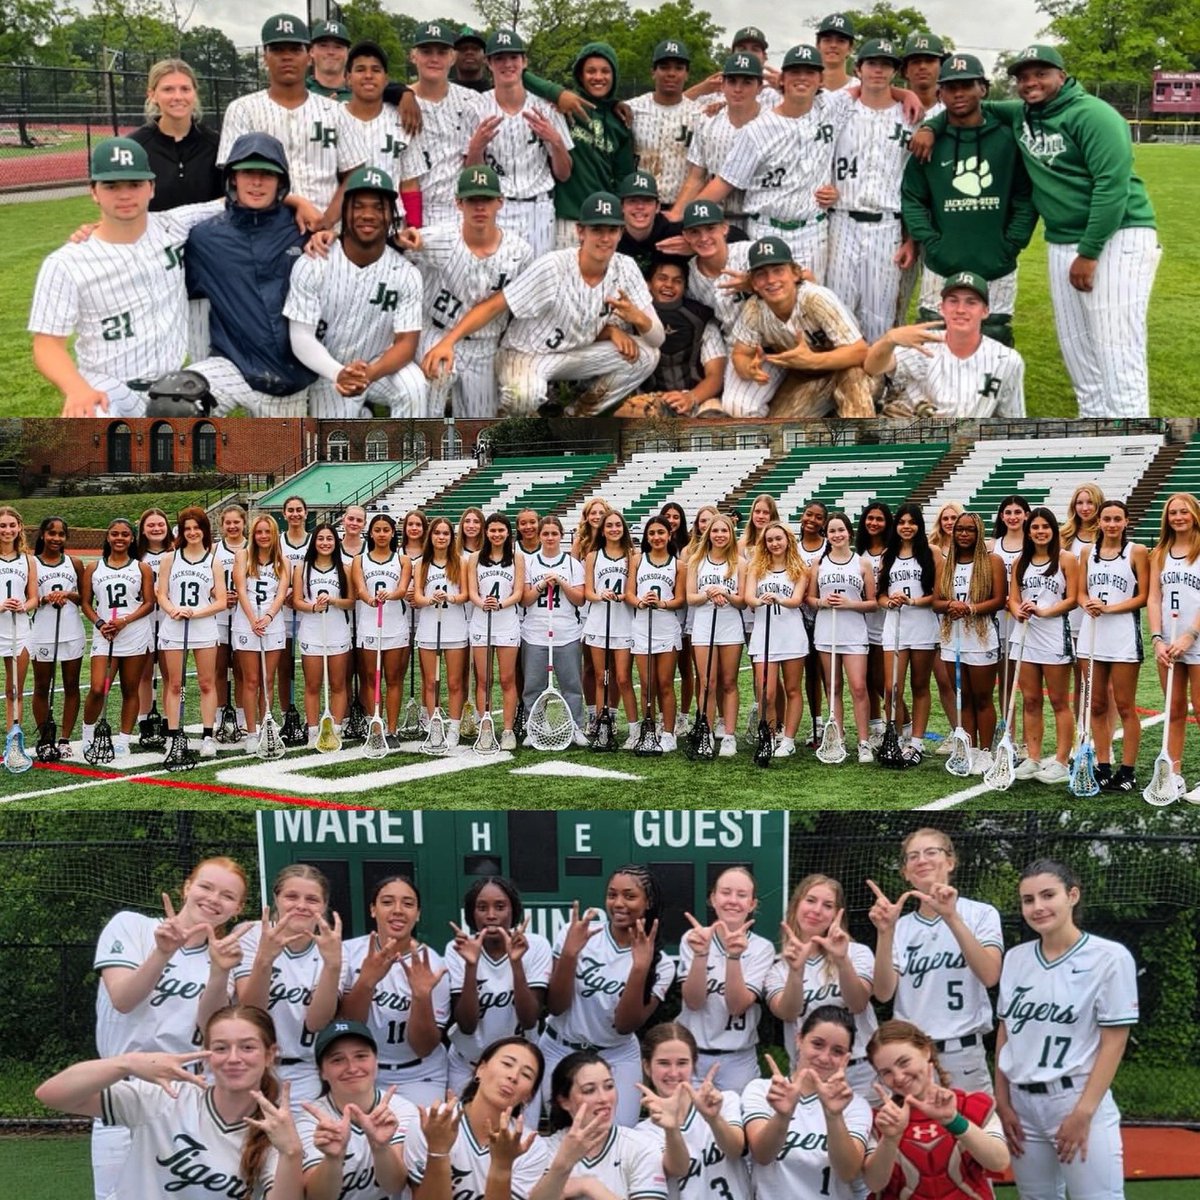 What’s better than 1 team advancing in 2024 DCSAA Playoffs? 3 Tiger Teams advancing in DCSAA Playoffs! Way to go @jacksonreedsoftball @jacksonreed.baseball and @jacksonreed.girlslax - Best of luck as you all continue! We’re #SuperProud of you! This is definitely #TigerPride💚